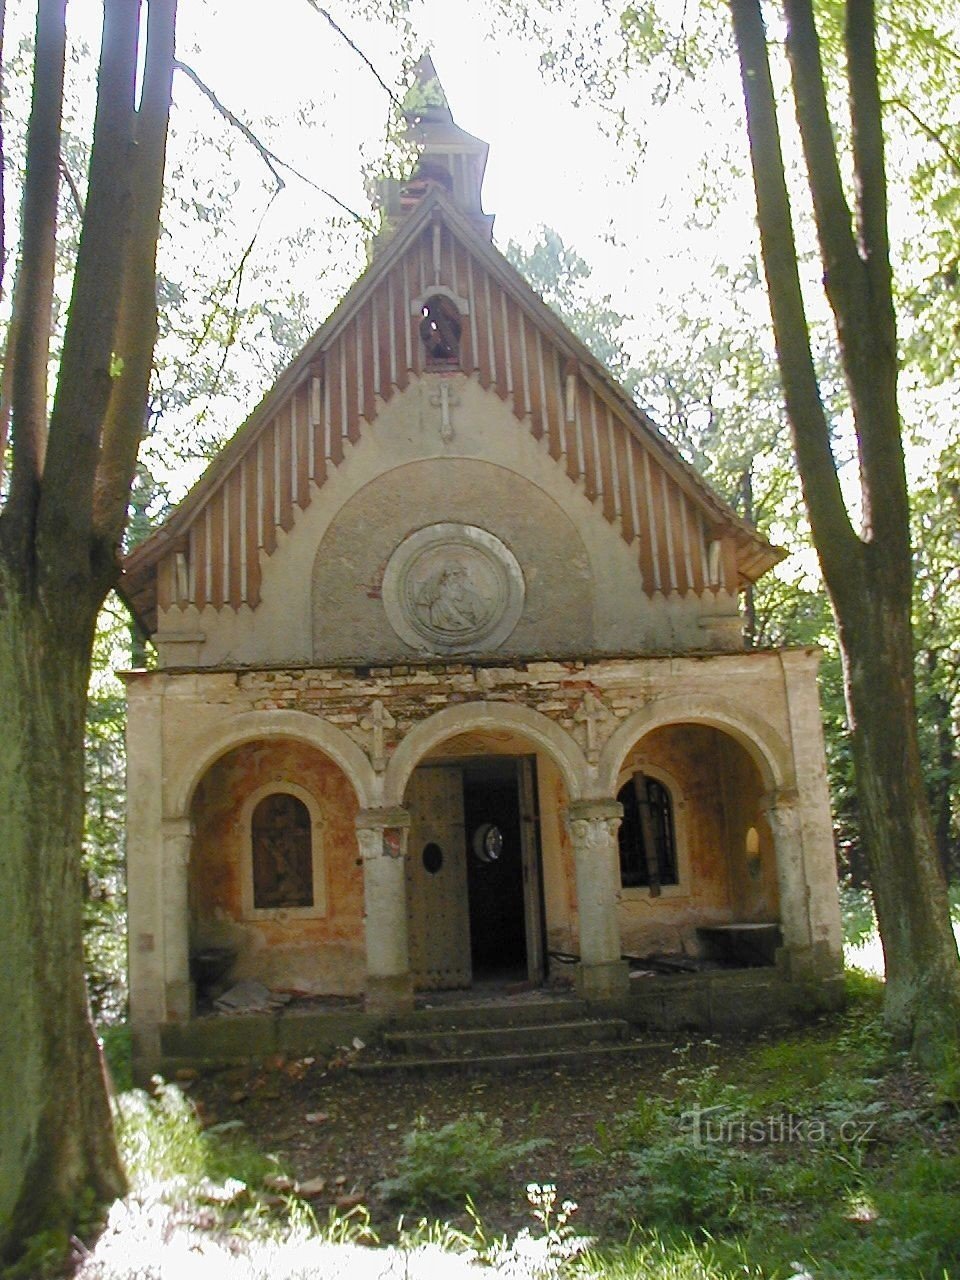 St. Jáchym - from the front